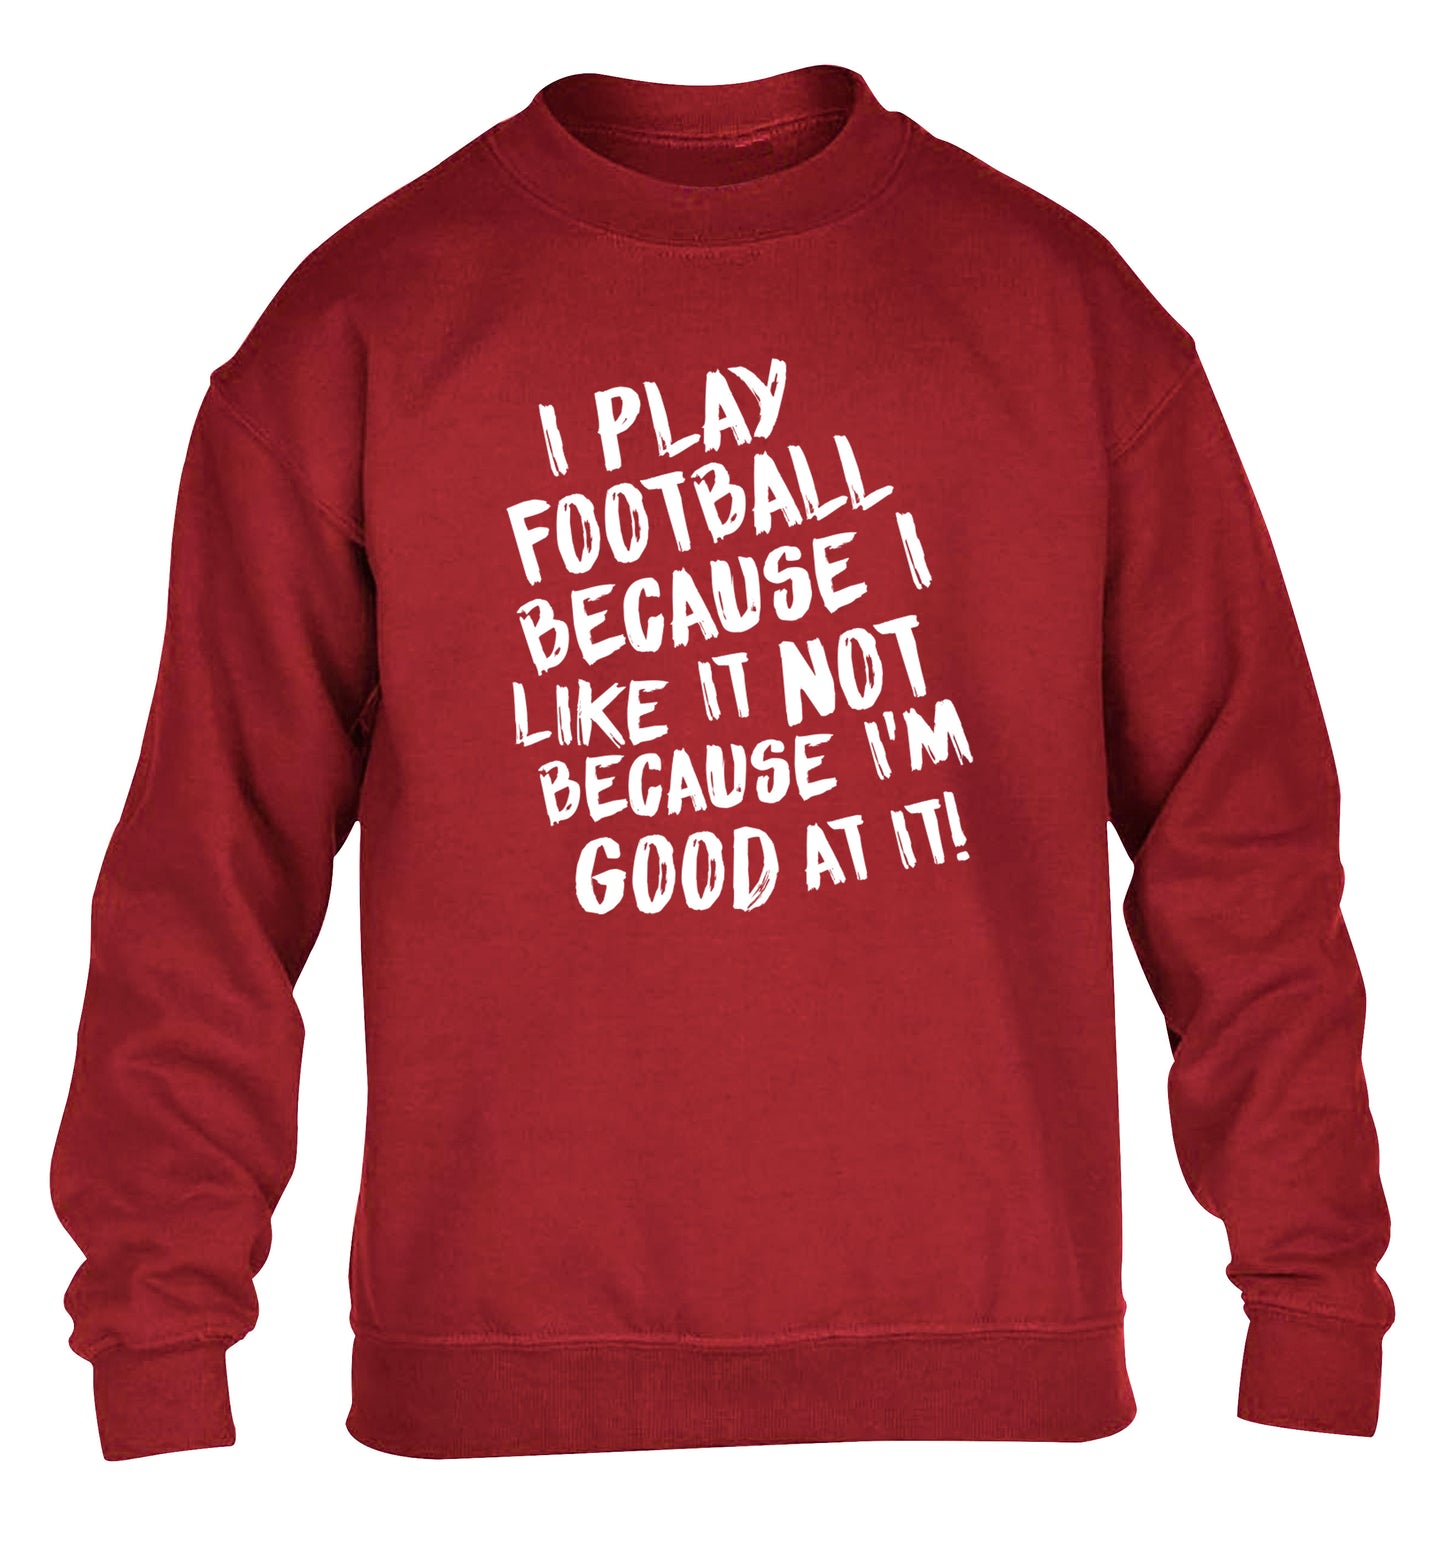 I play football because I like it not because I'm good at it children's grey sweater 12-14 Years